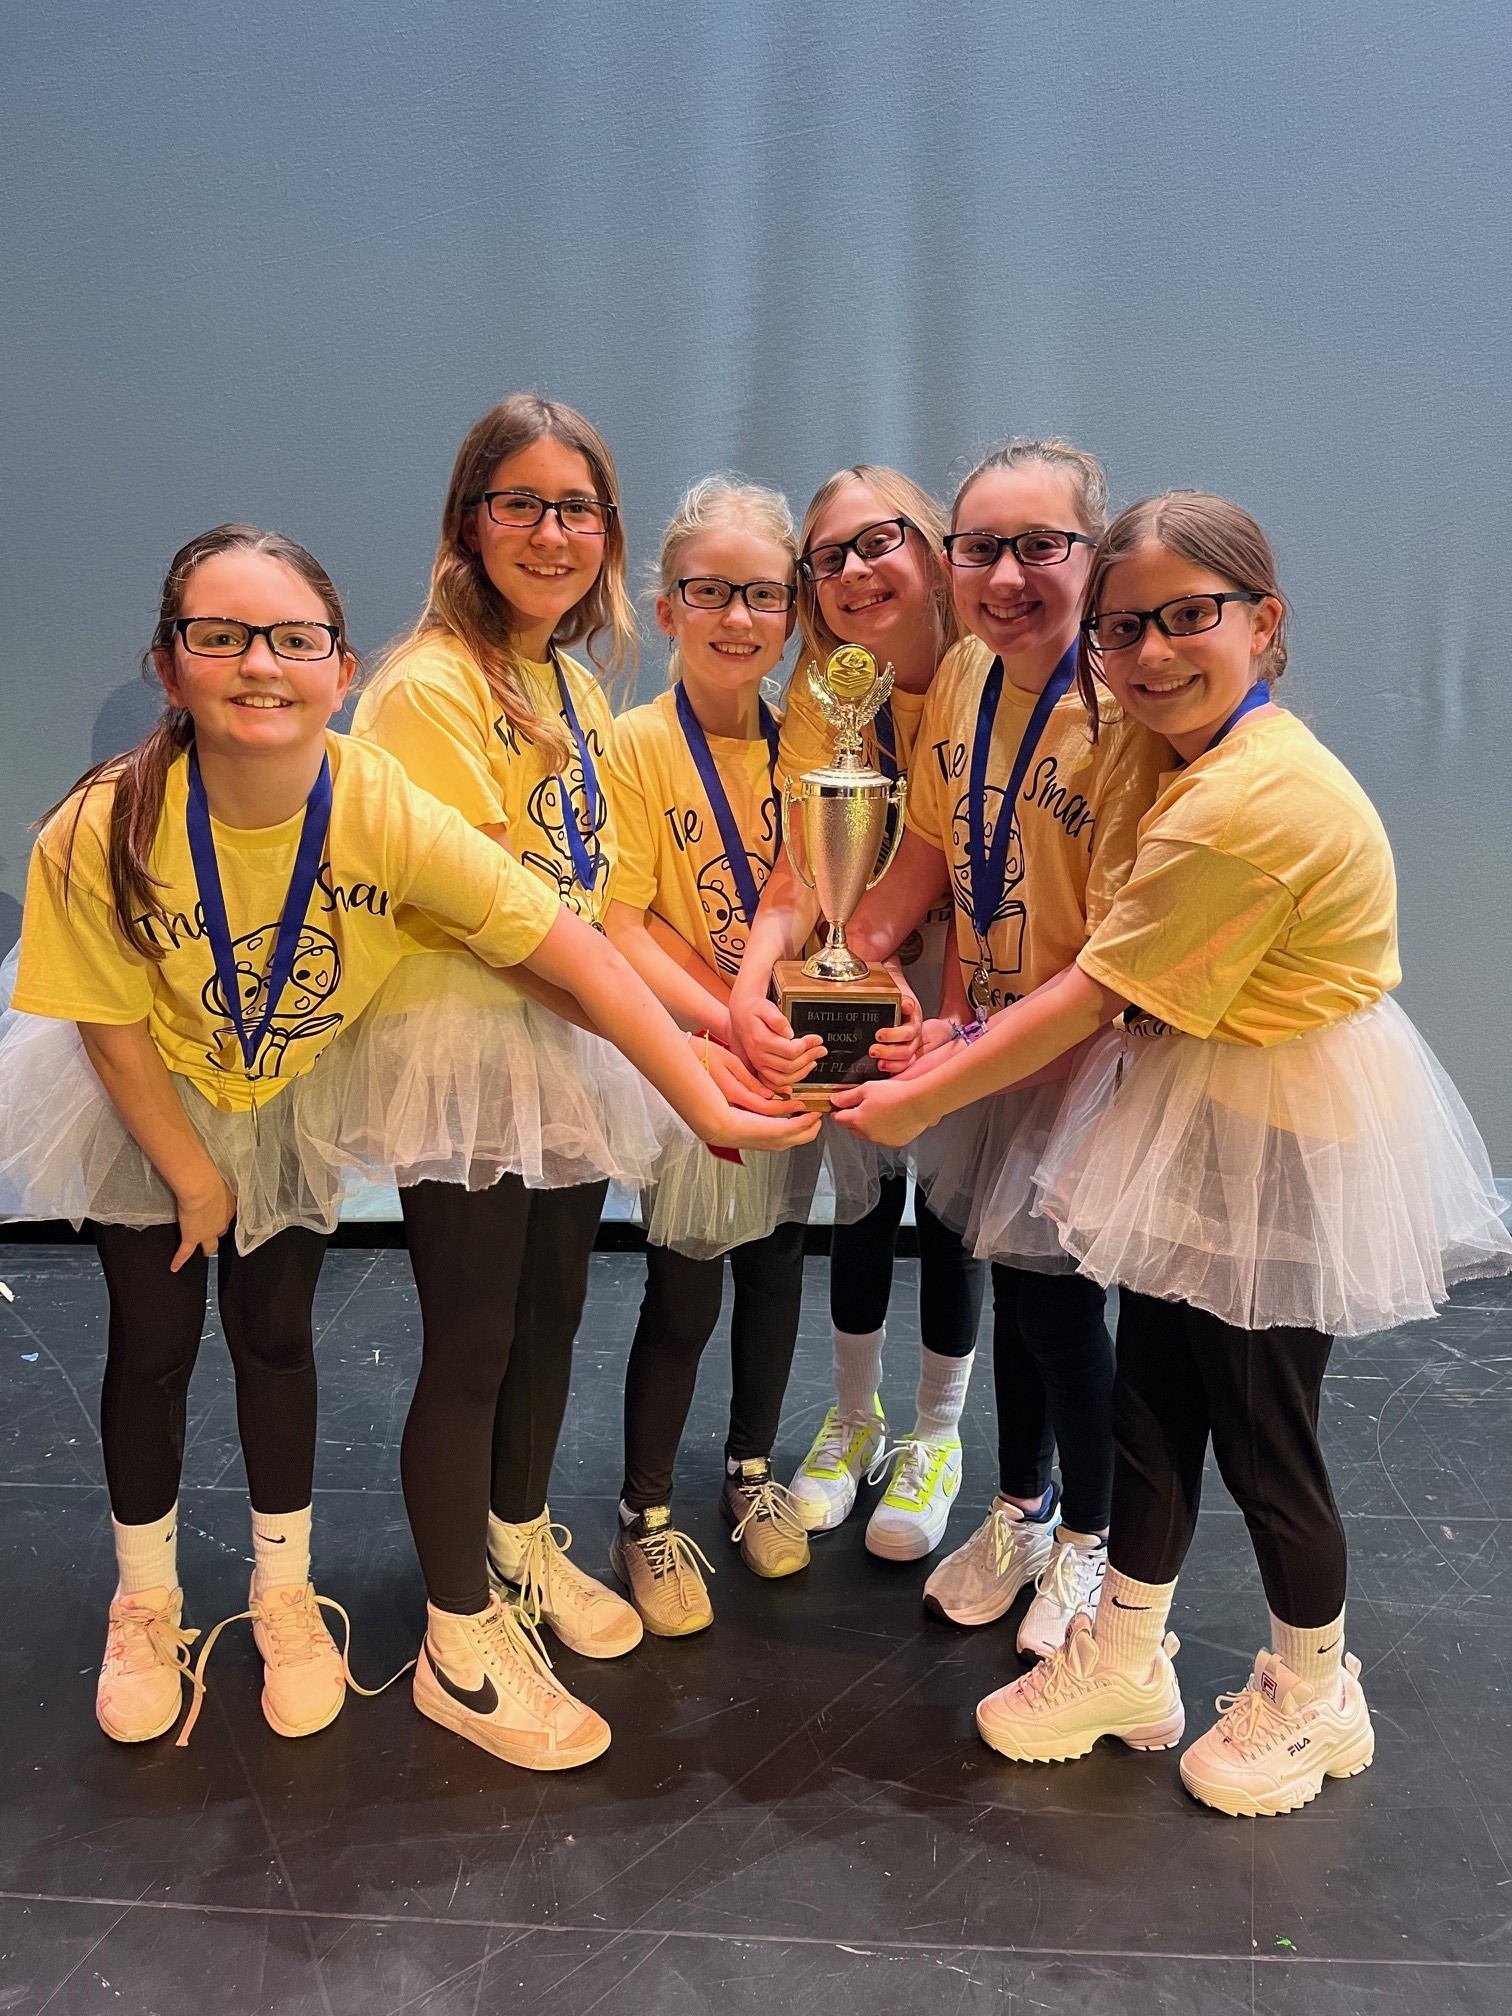 Championship team holding trophy. Six girls in yellow shirts and white tutus smiling with pride.